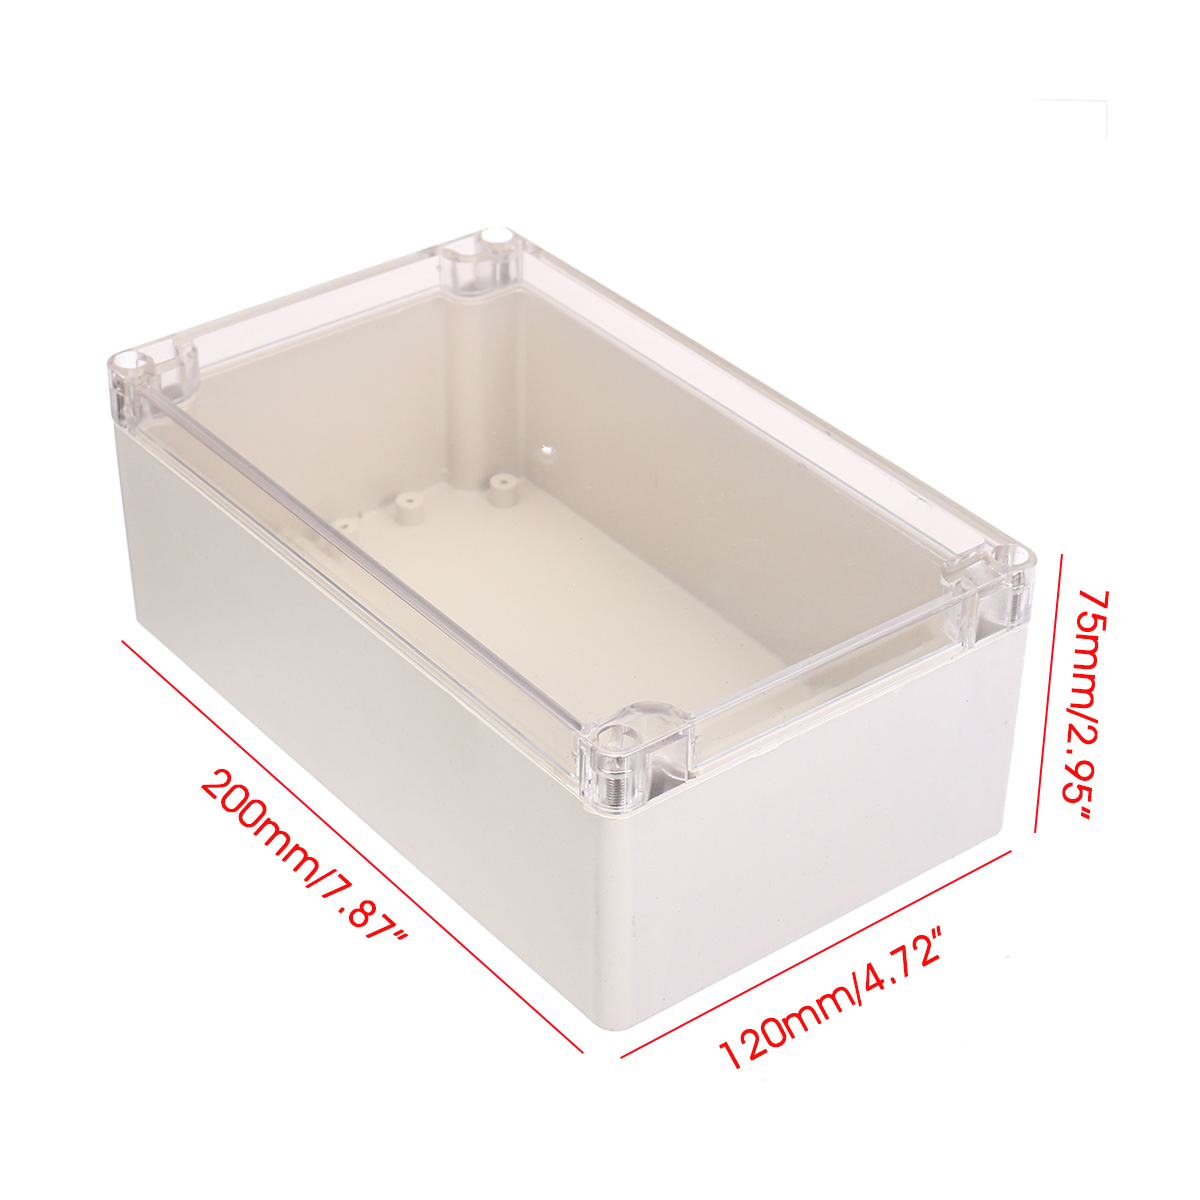 Plastic-Waterproof-Electronic-Project-Box-Clear-Cover-Electronic-Project-Case-20012075mm-1595734-3